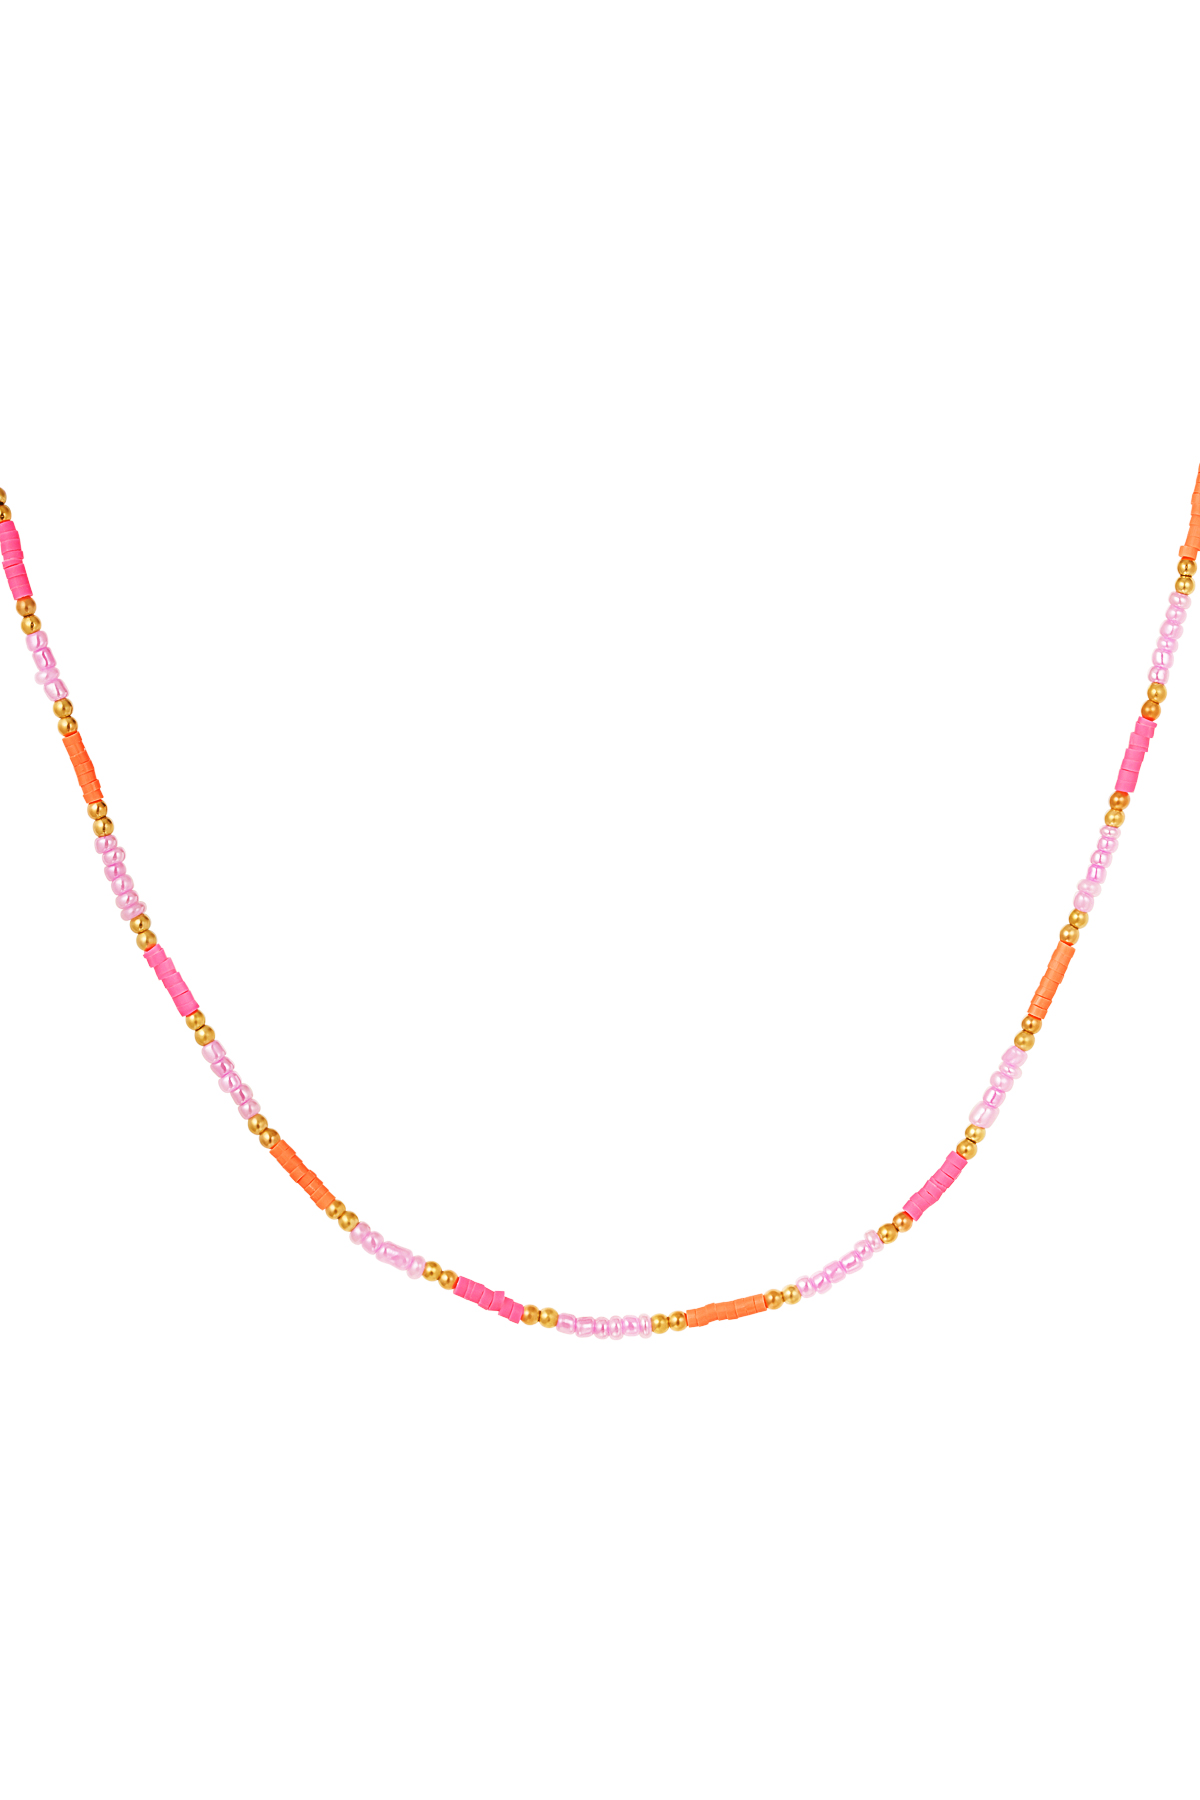 Necklace small colorful beads - pink/orange h5 